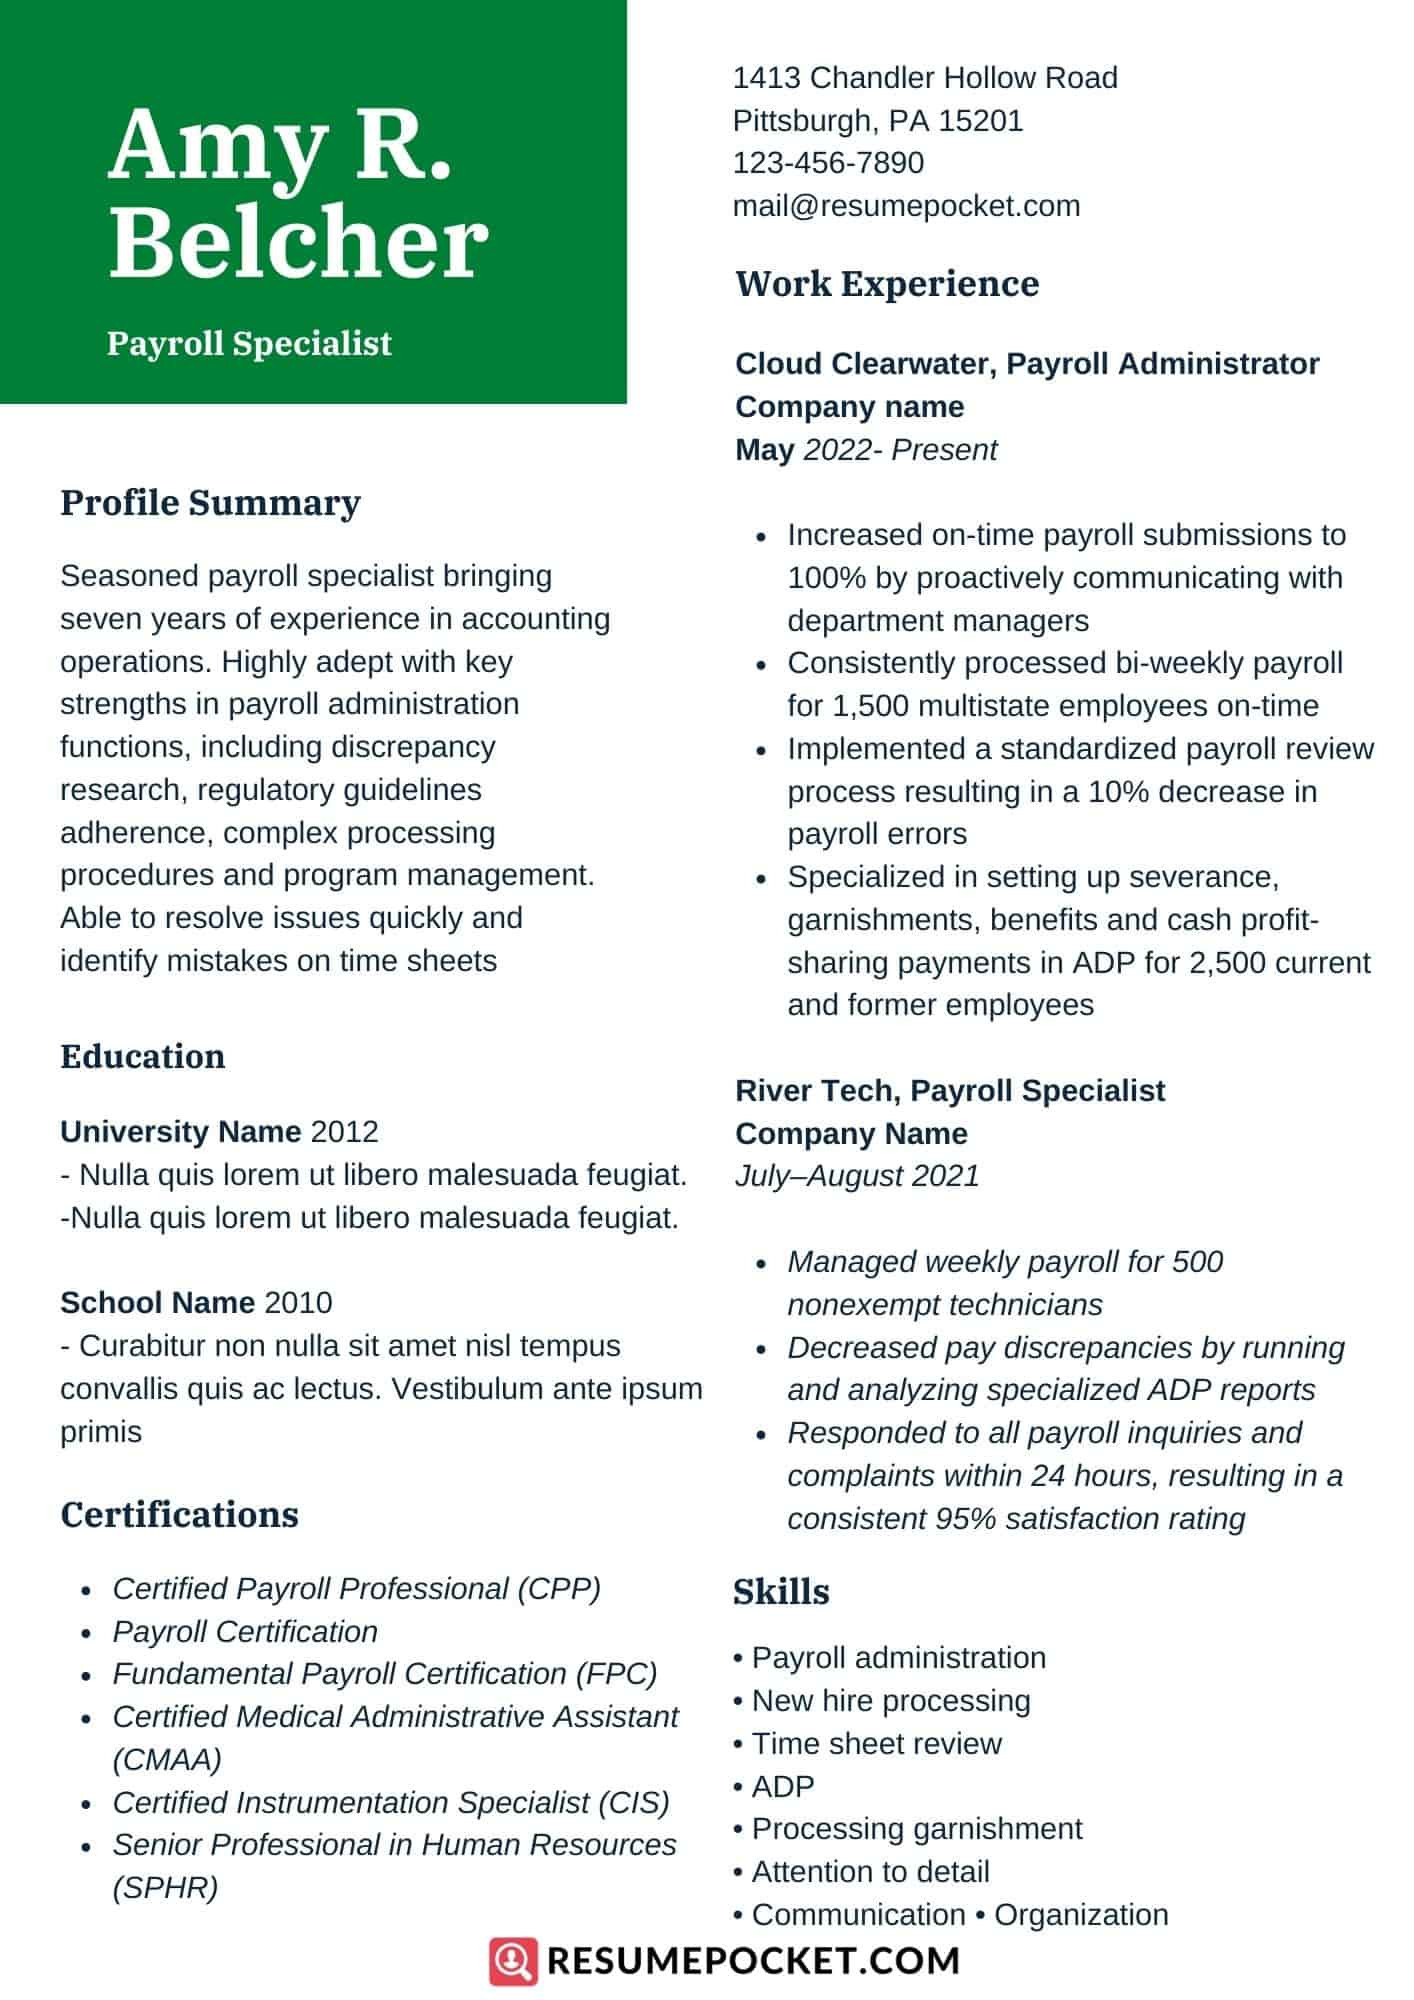 1 Year Experience with Payroll Resume Sample Payroll Specialist Resume Sample – Resumepocket